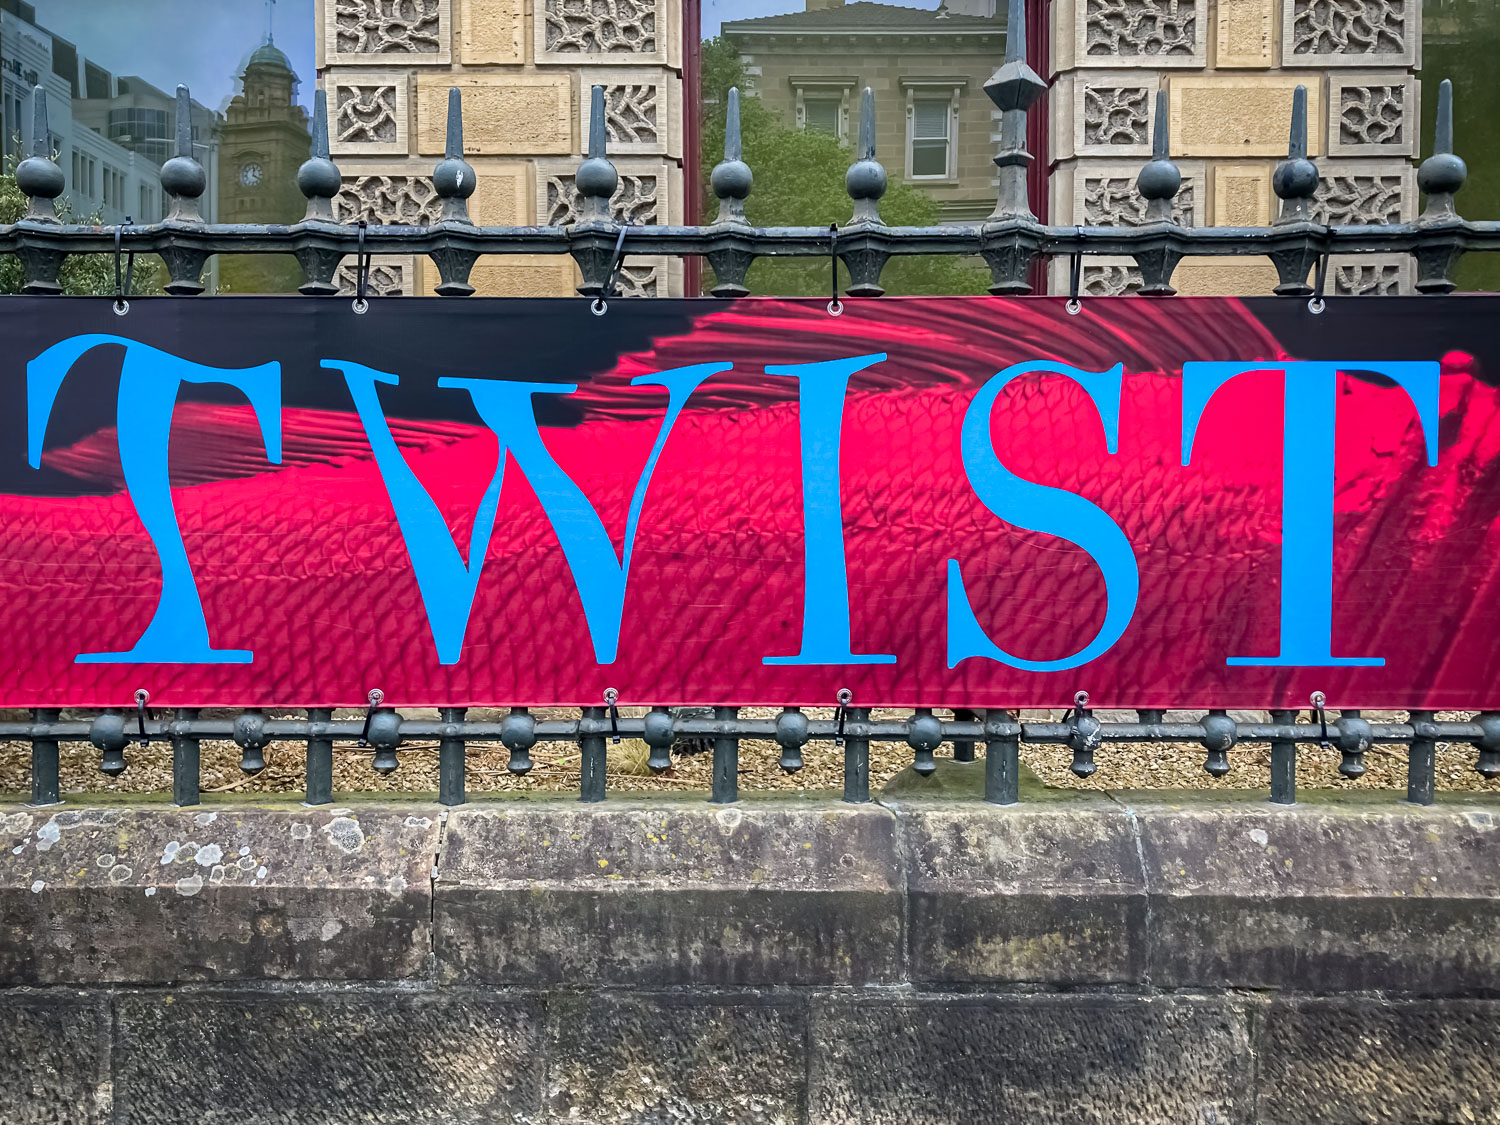 The word "TWIST" in blue text on a pink background of a sign hanging on a wrought iron fence outside a sandstone building